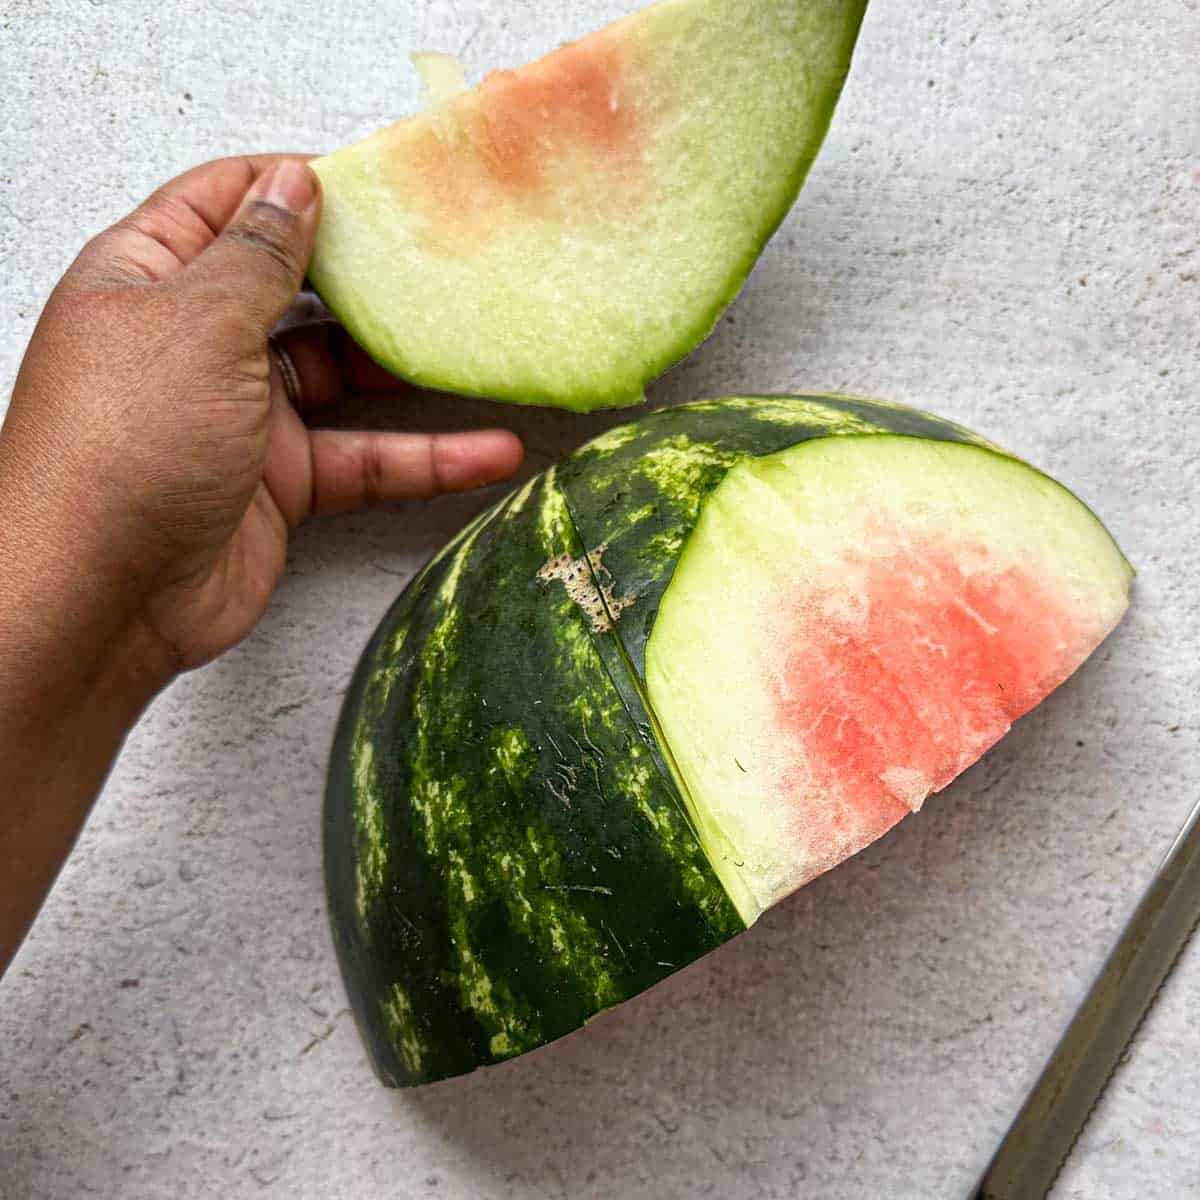 Removing the rid off a ¼ of the watermelon